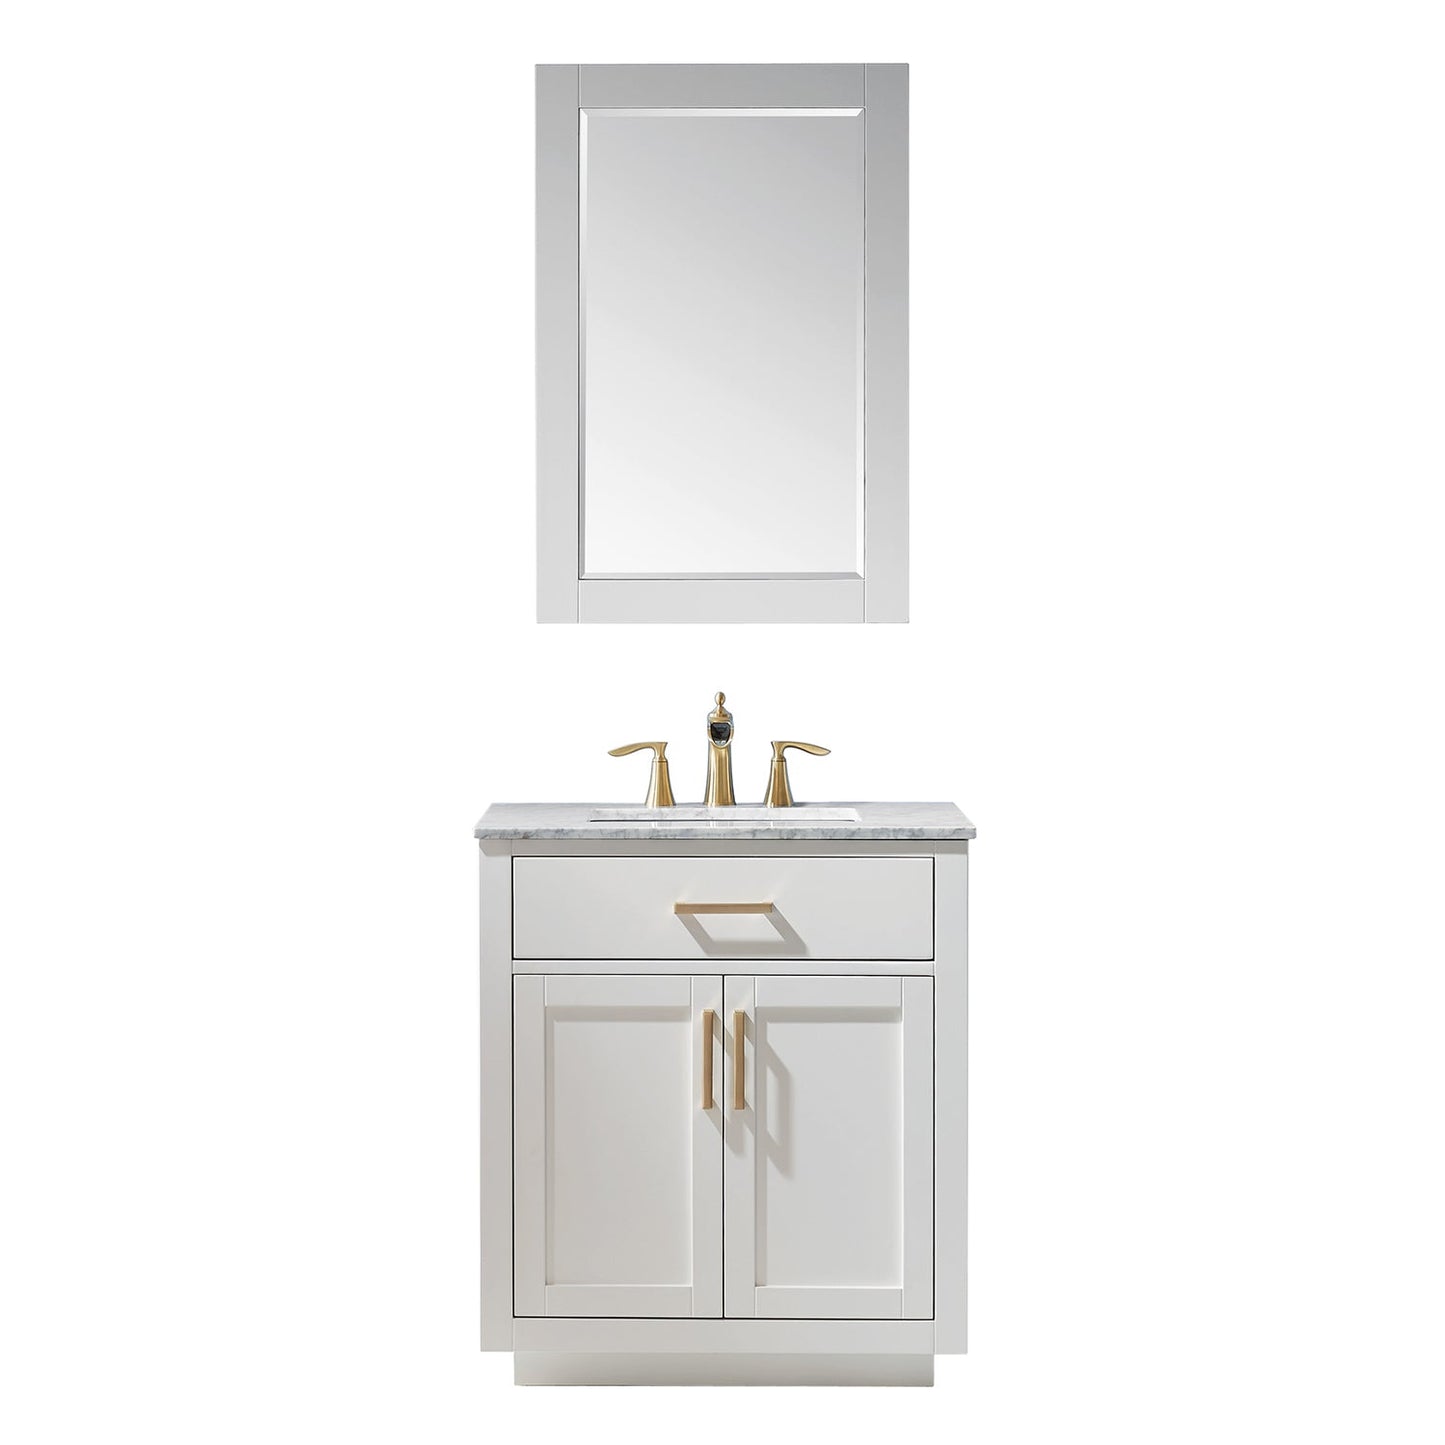 Ivy 30" Single Bathroom Vanity Set in White and Carrara White Marble Countertop with Mirror